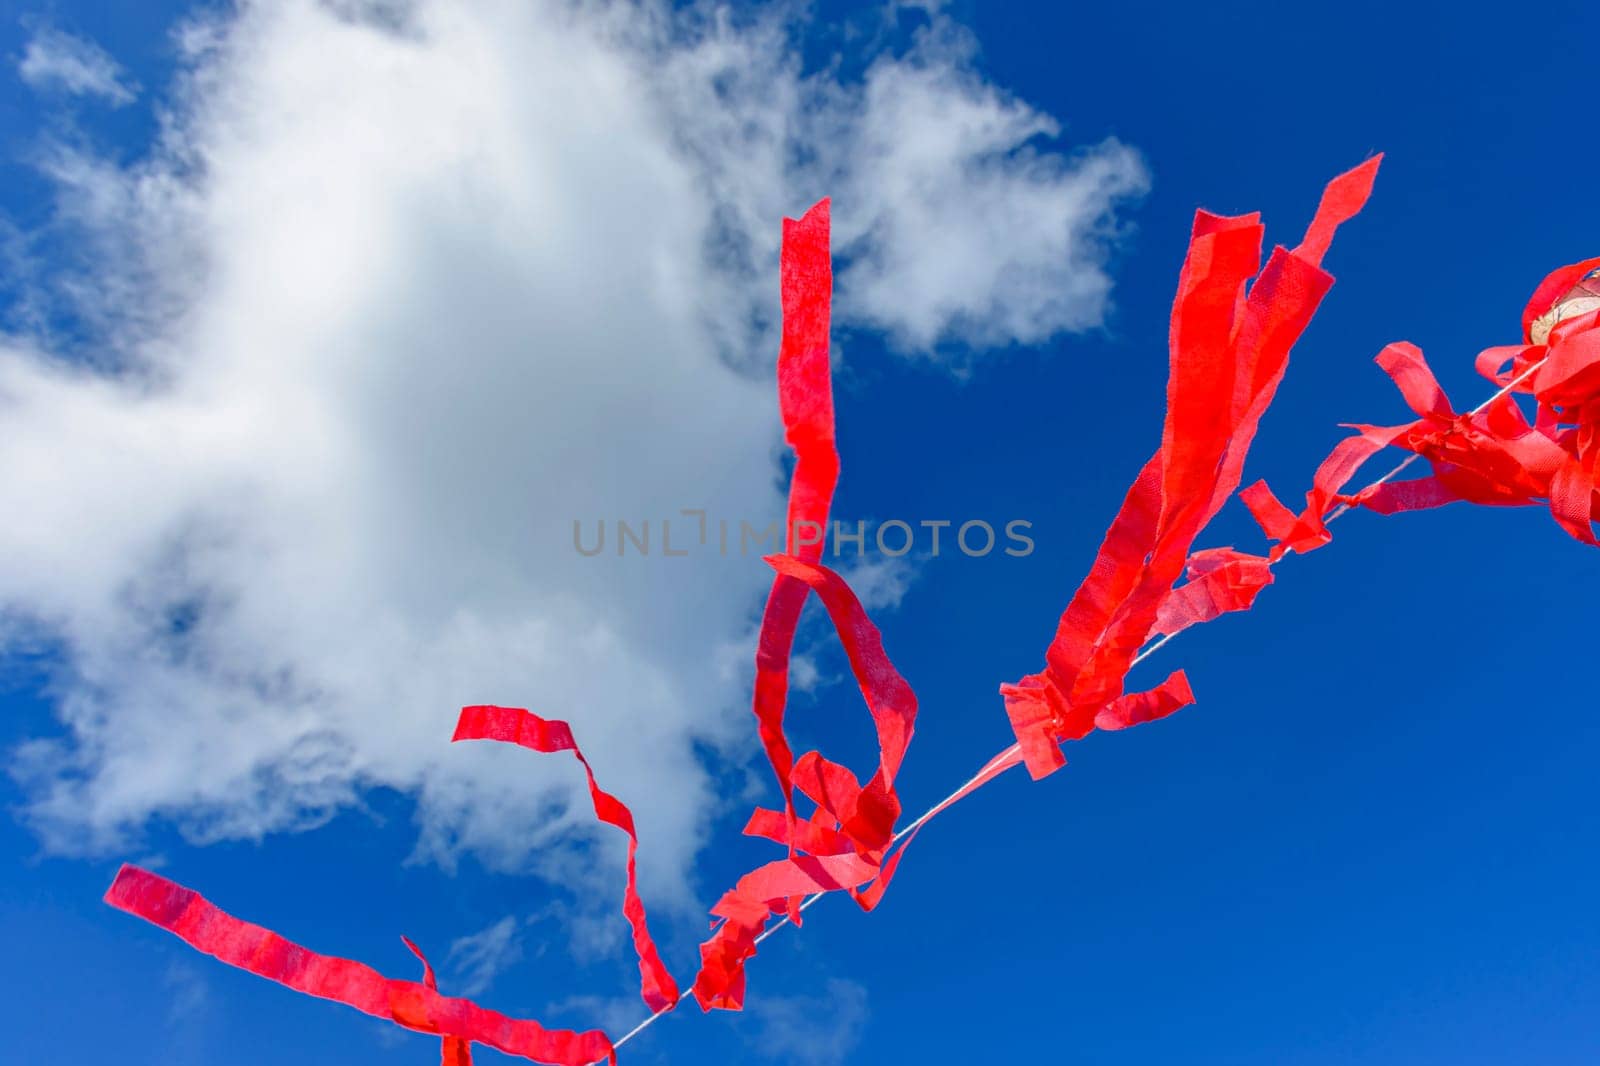 Decorative vivid red ribbons prepared for a religious festival in the city of Lavras Novas in Minas Gerais swaying in the wind with blue sky